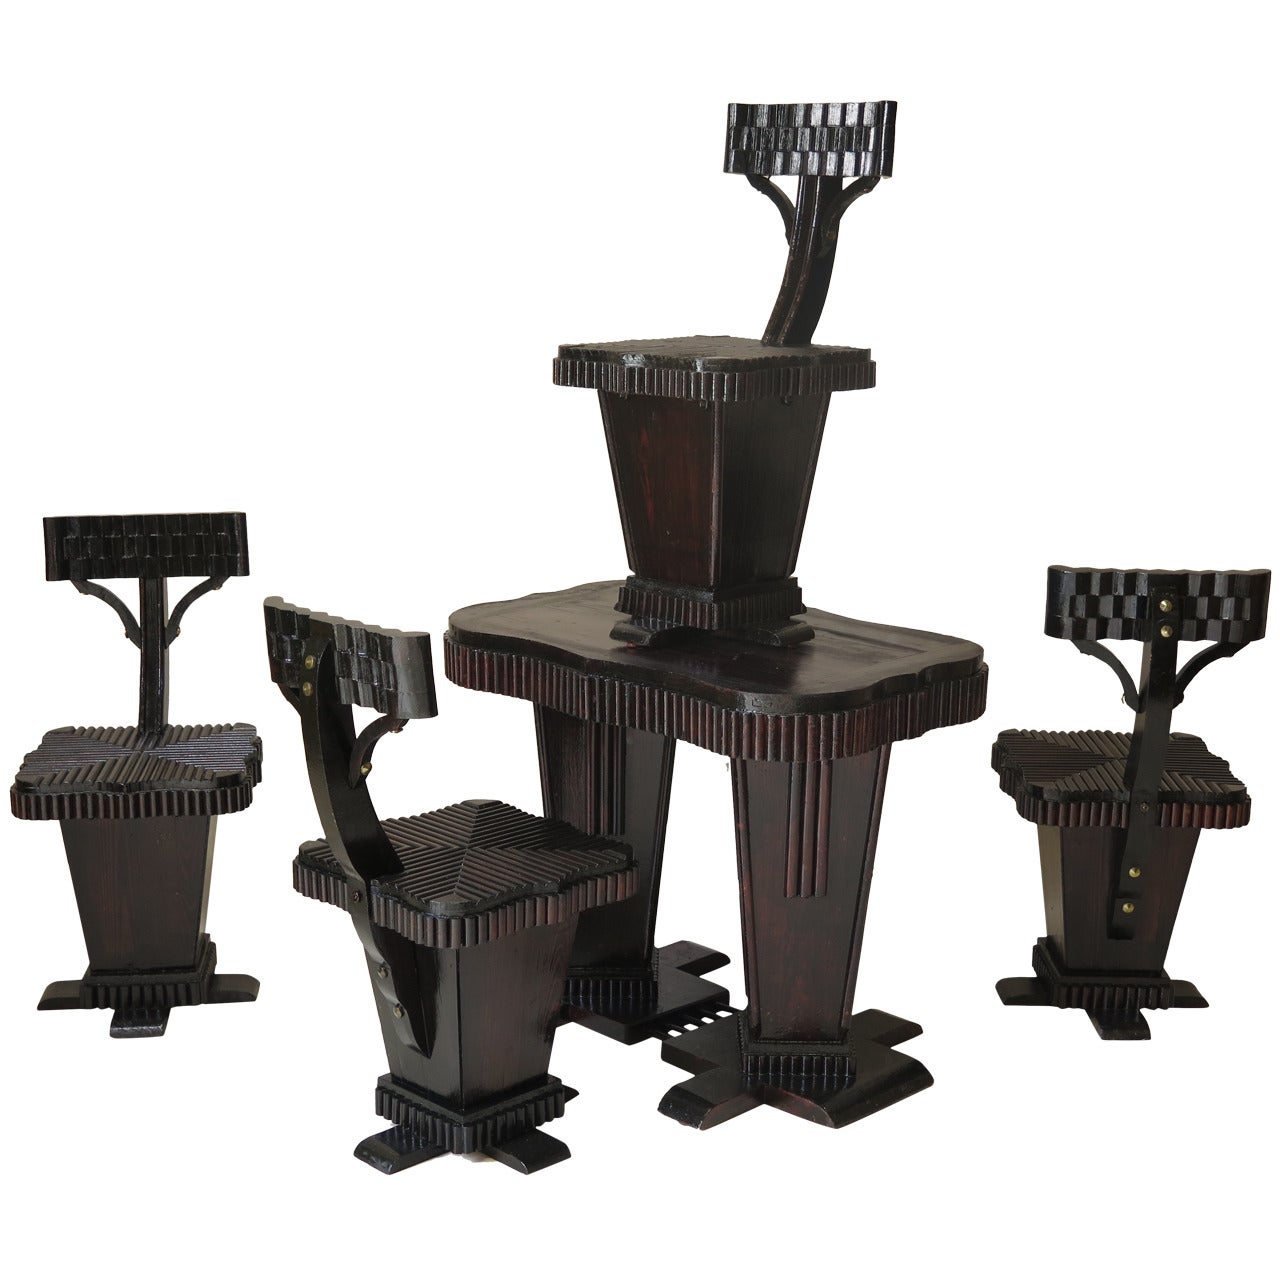 Geometric-Patterned Art Deco Table and Chair Set, France, 1930s